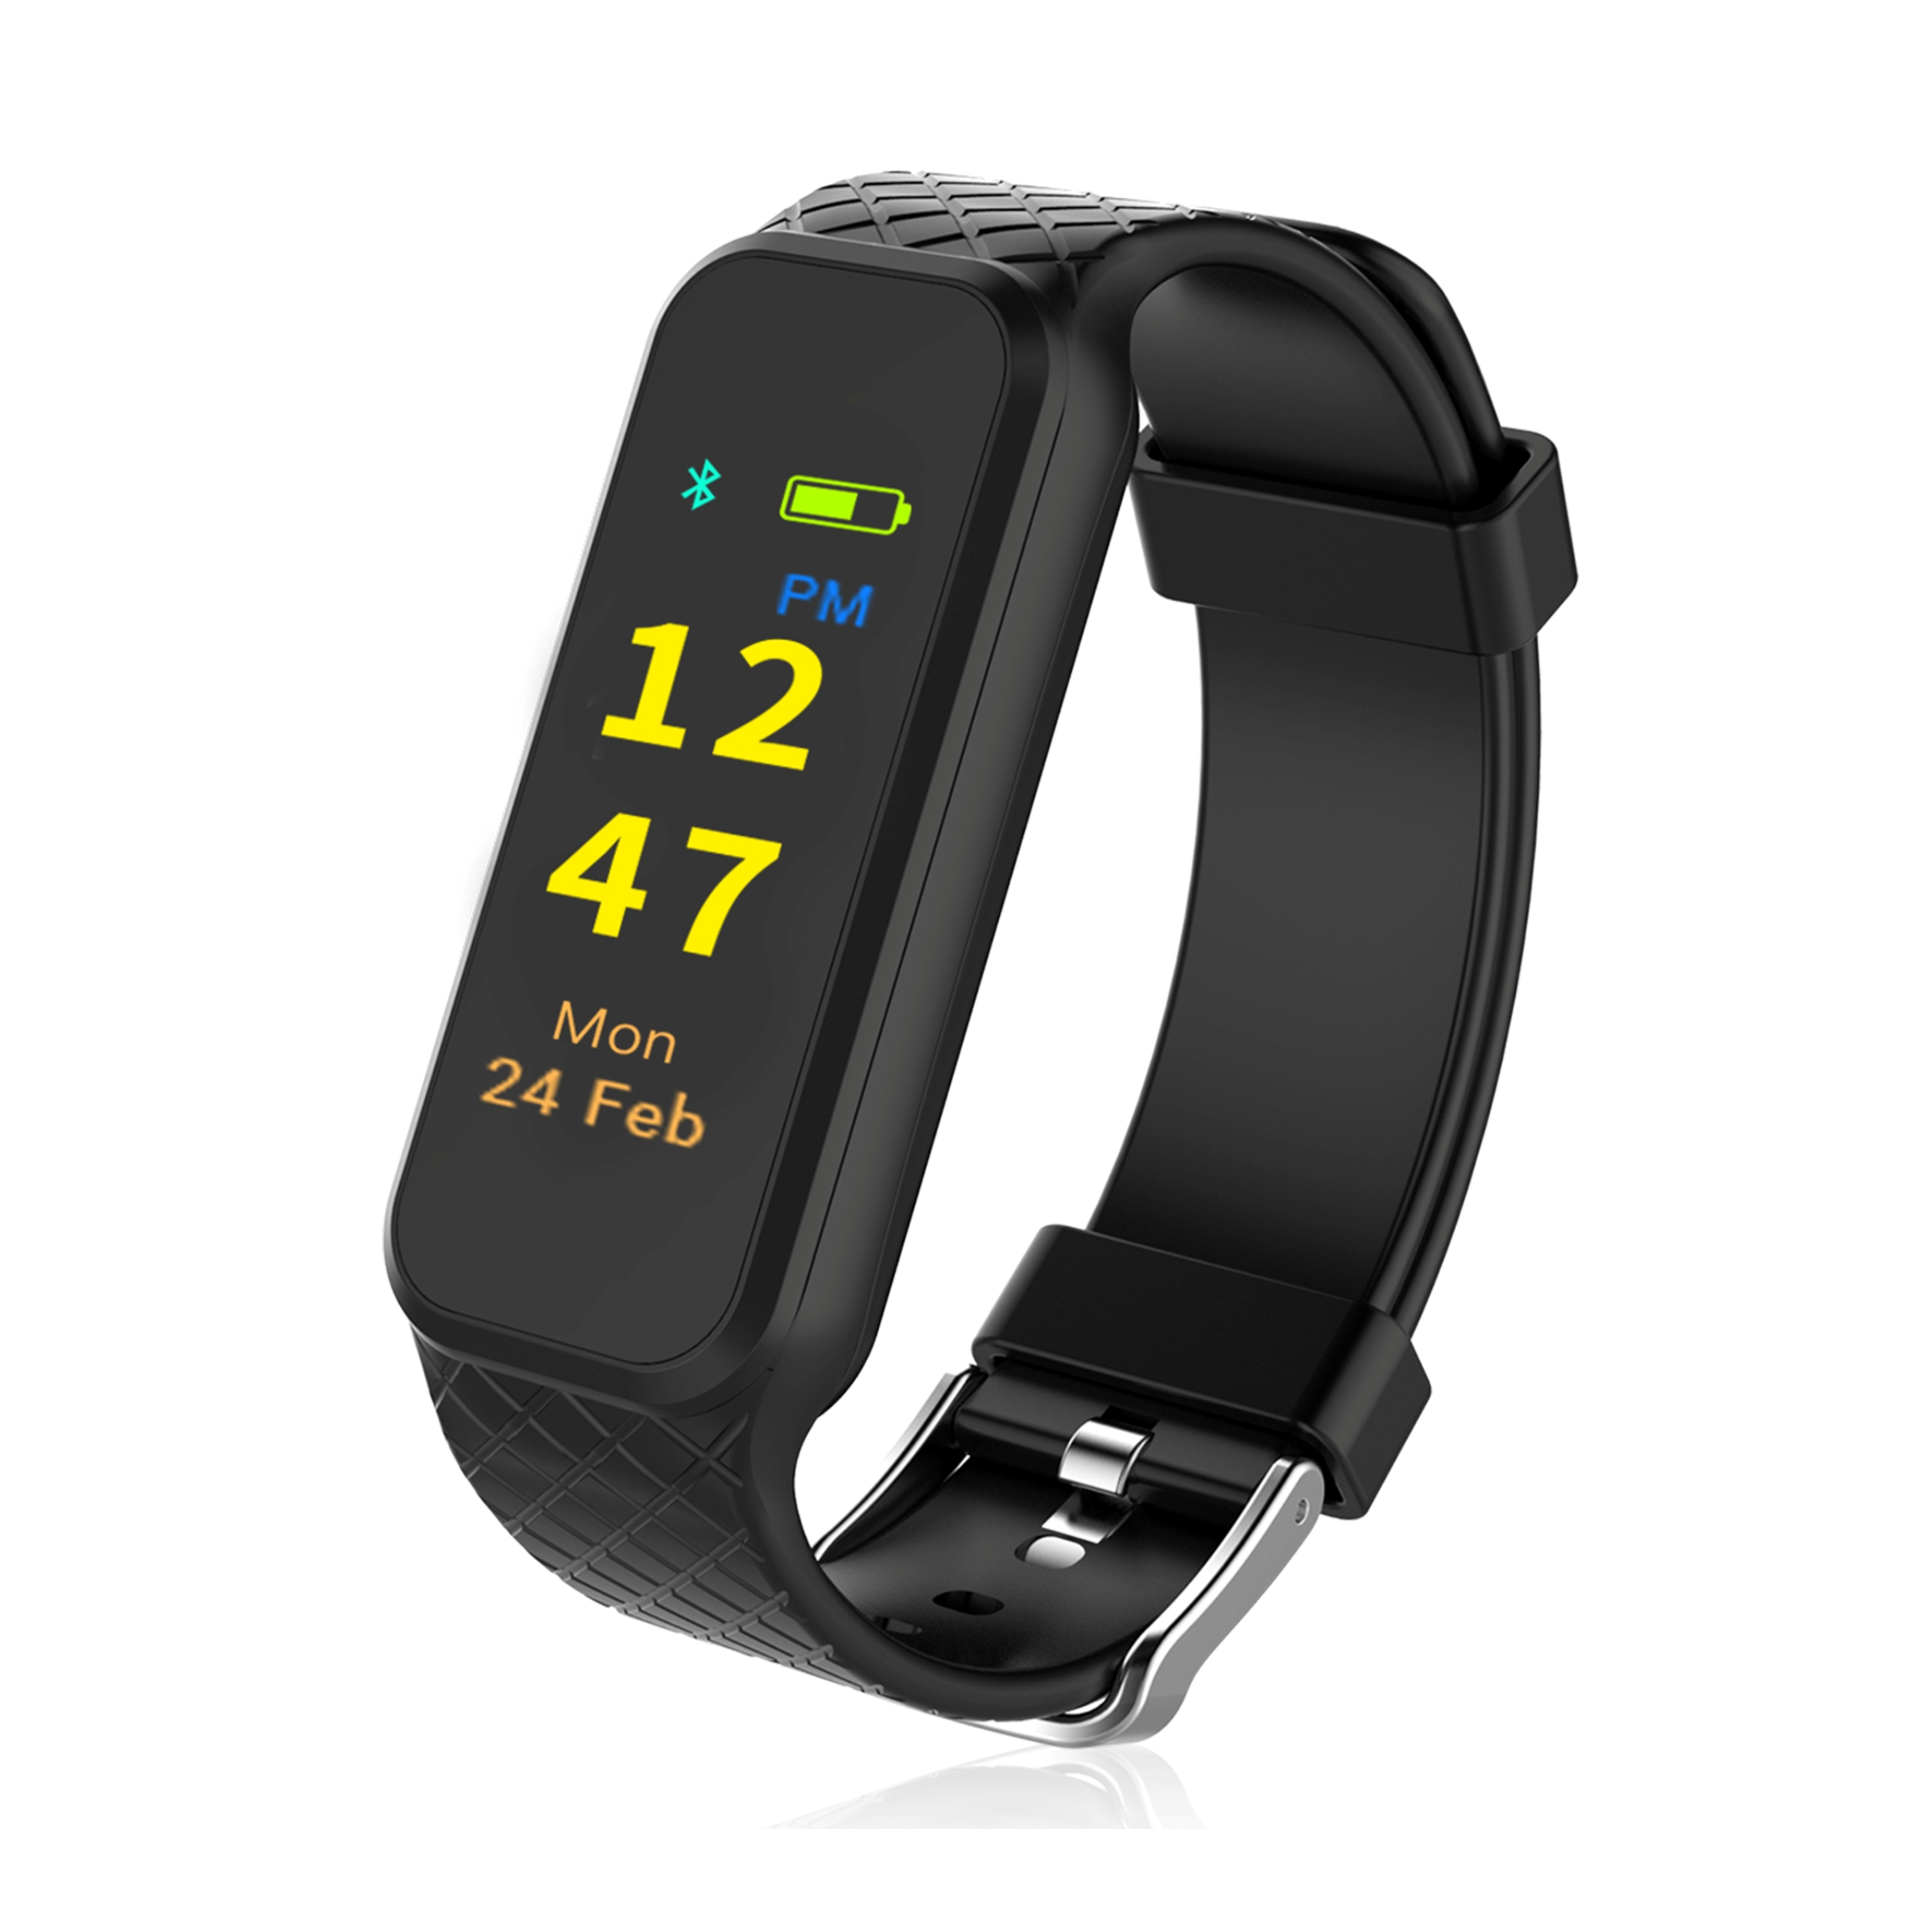 You are currently viewing Portronics Launches “Yogg HR” Slim & Smart Fitness Tracker